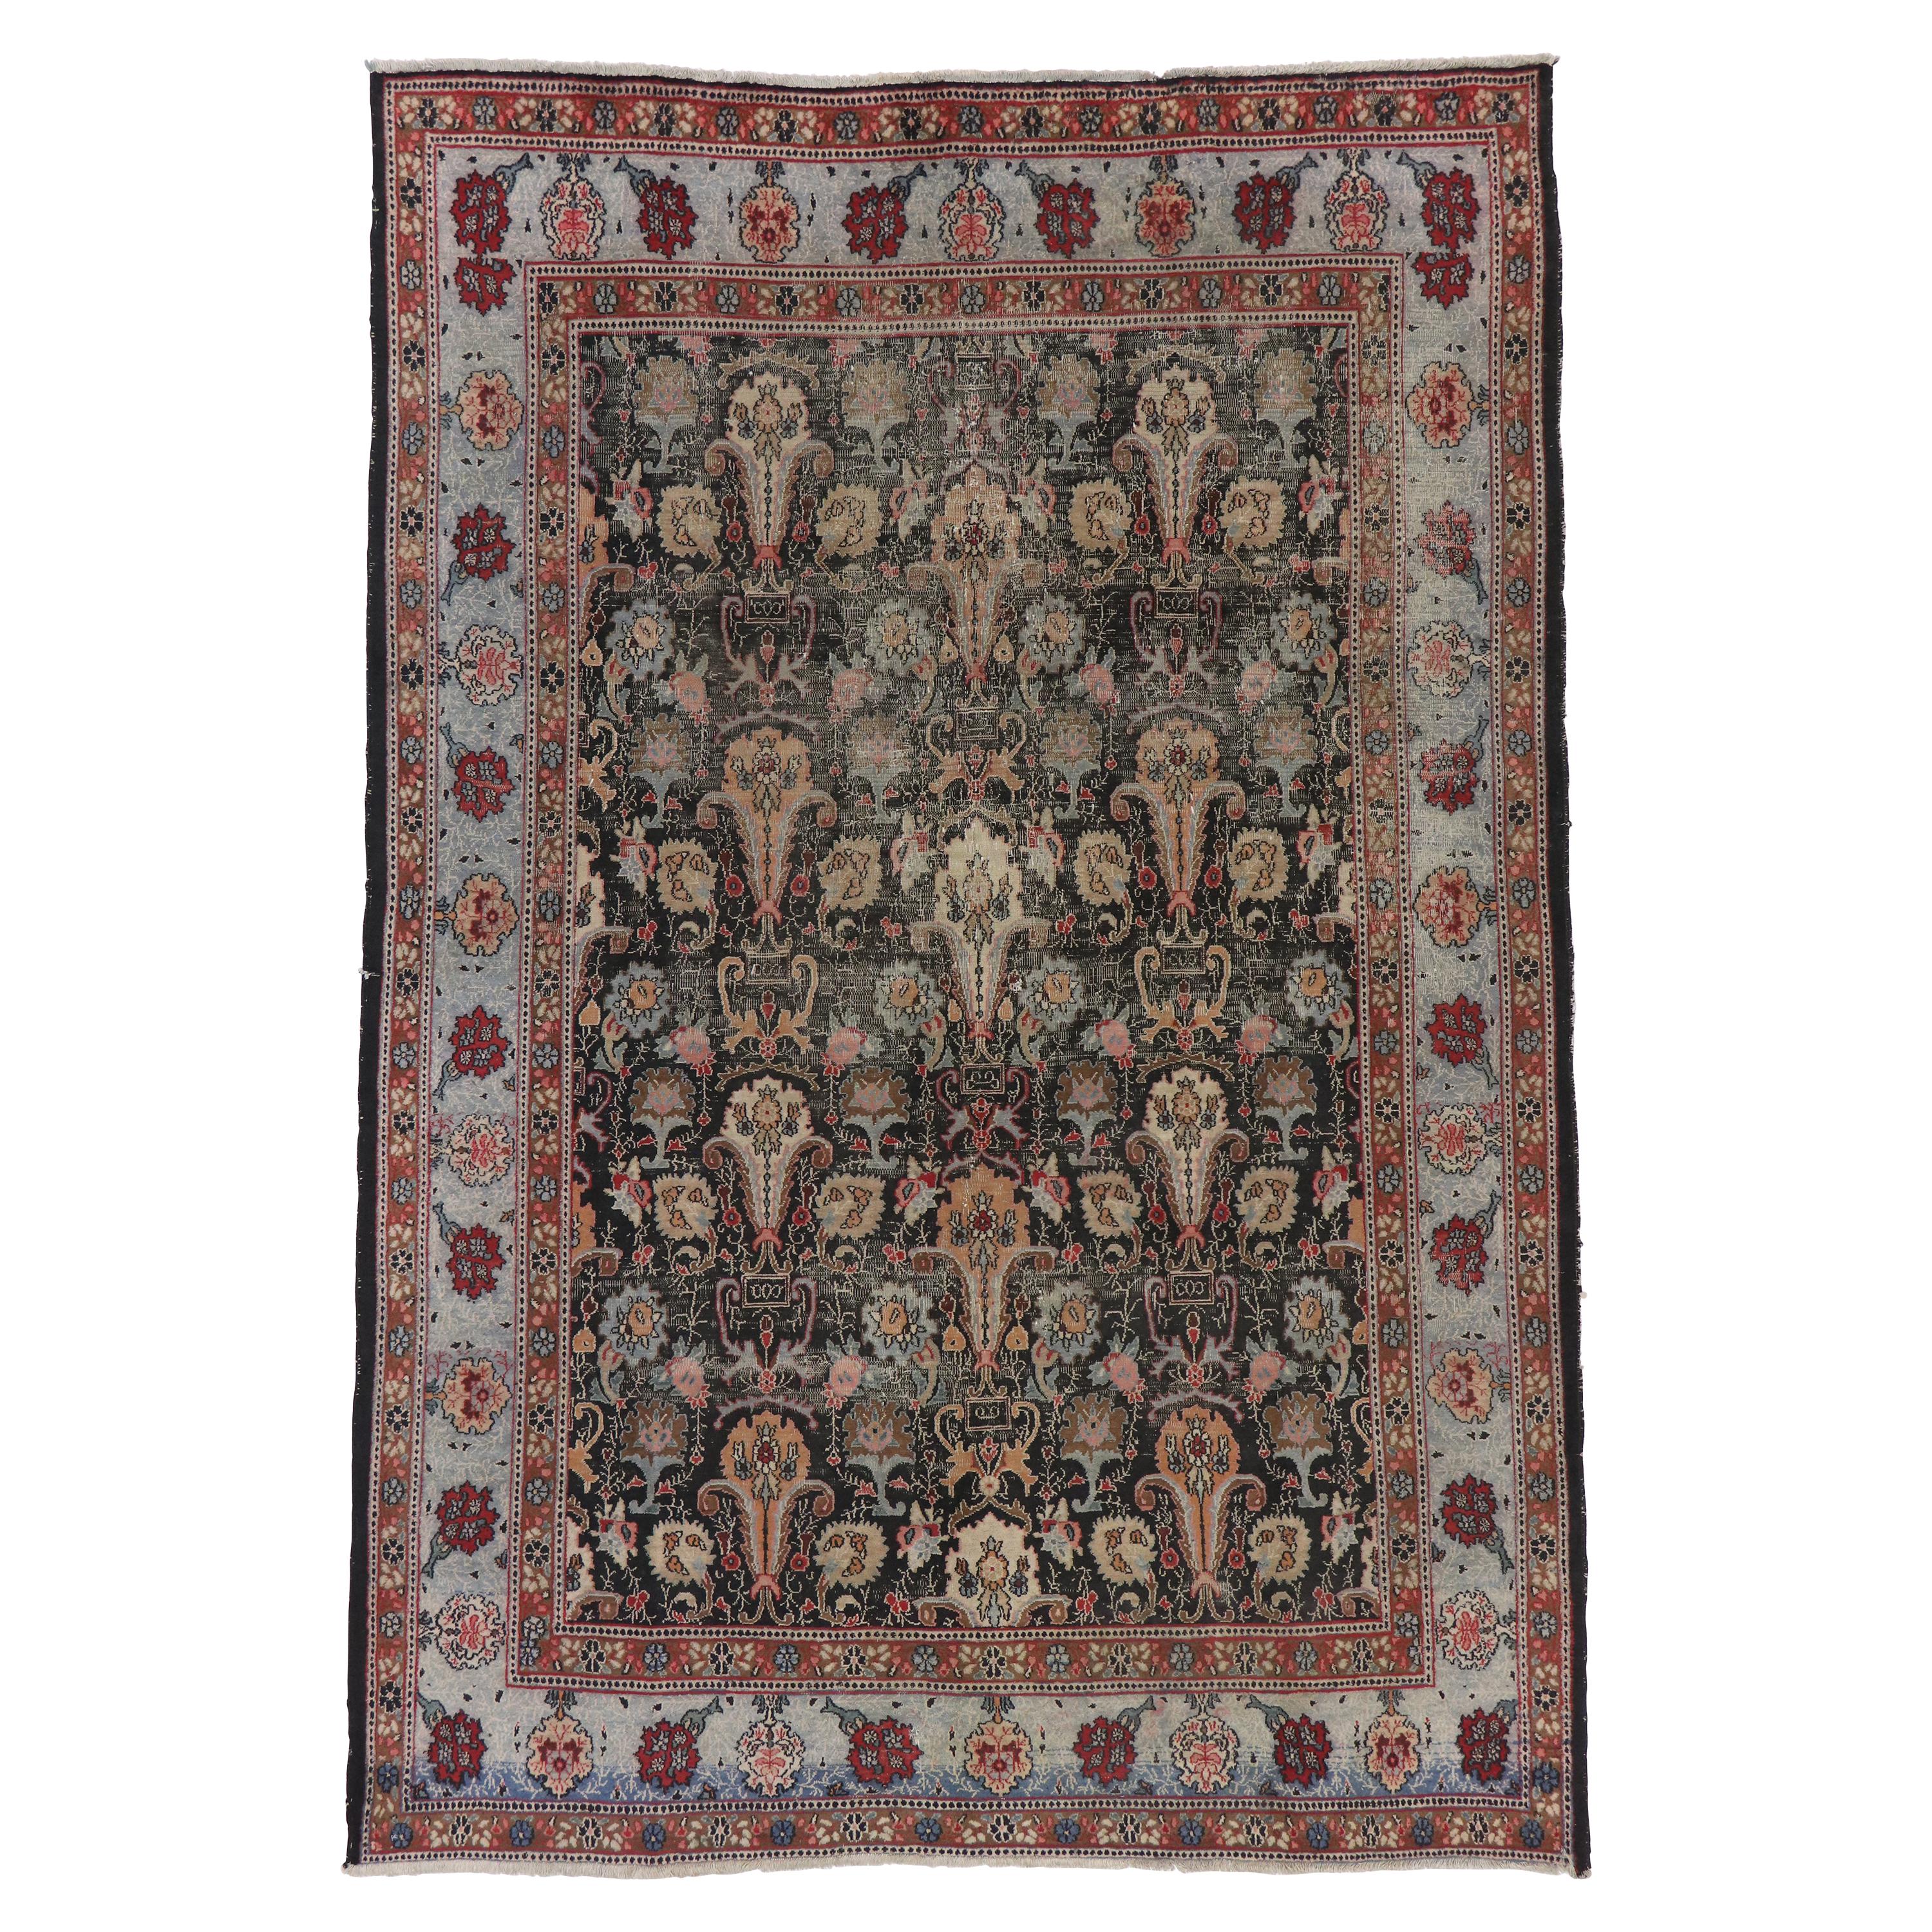 Distressed Antique Persian Khorassan Rug with Rustic American Colonial Style For Sale